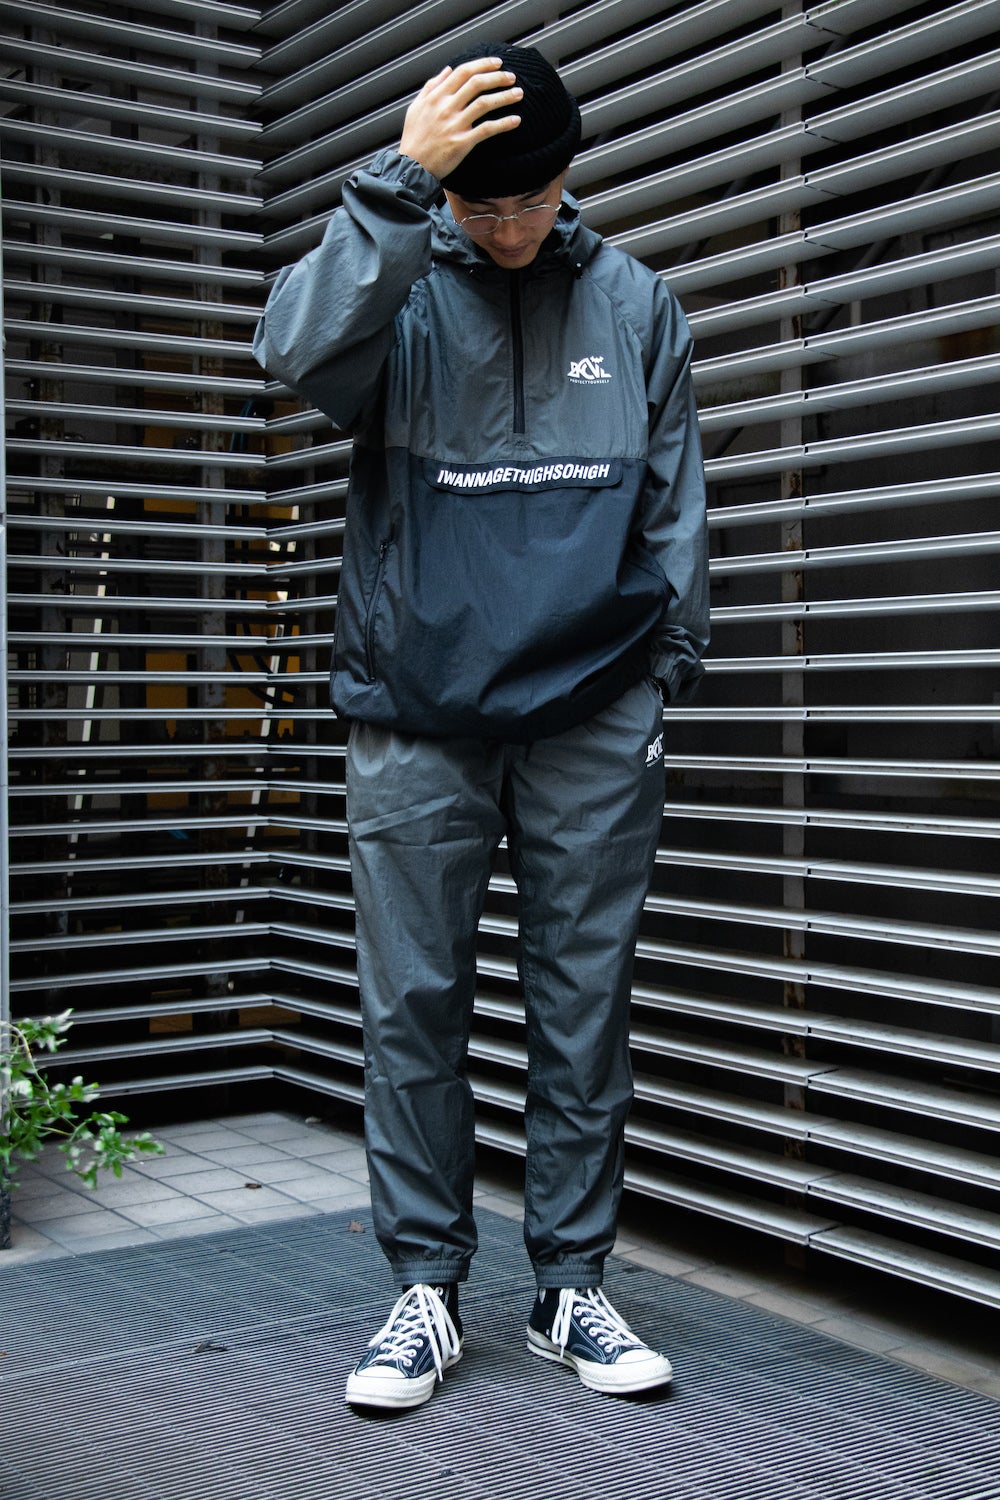 Back Channel Style Sample | WHATZIS official blog